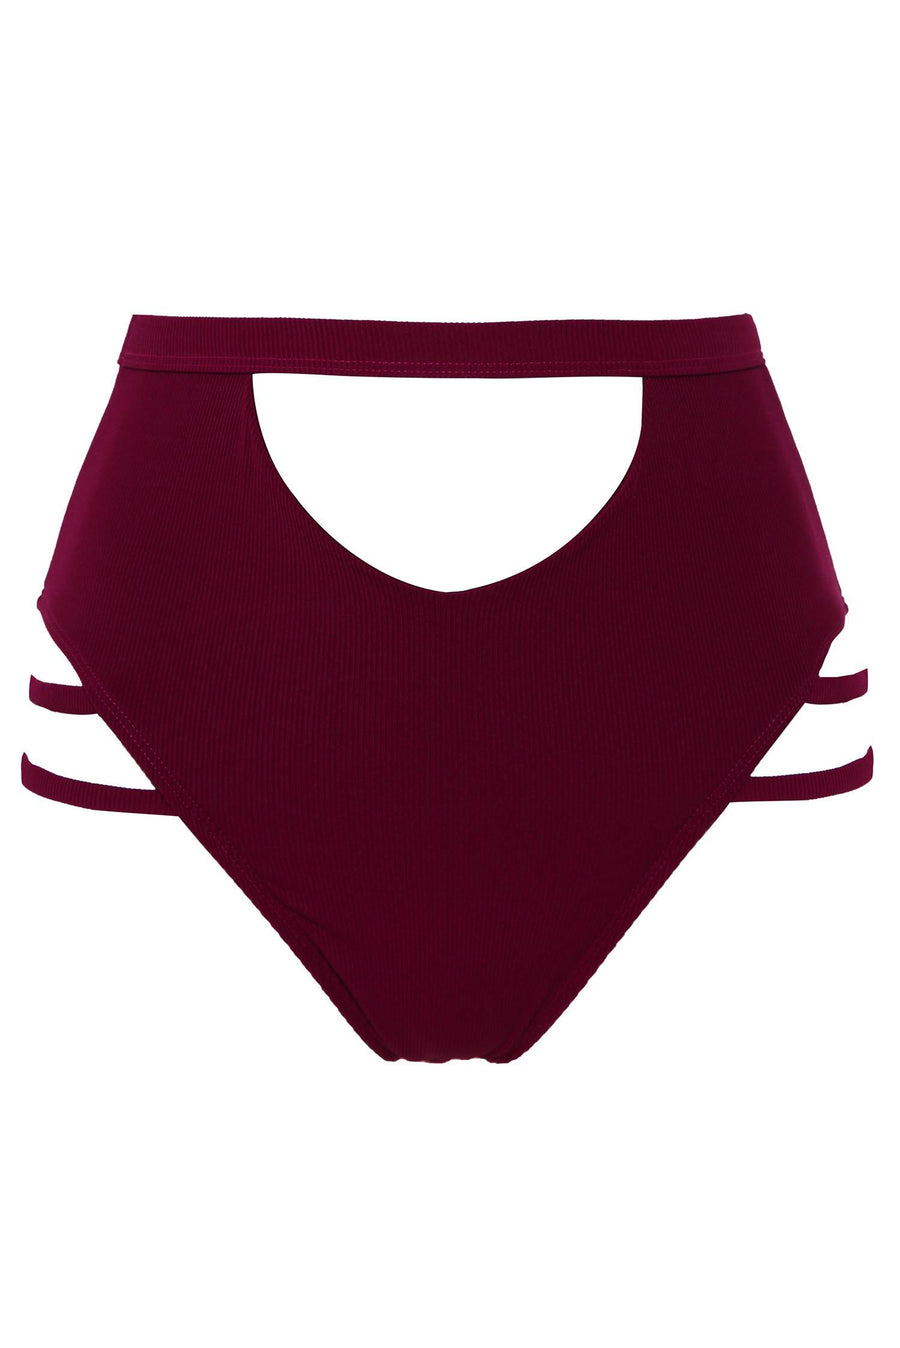 The Valley Bottoms - Ribbed Plum Shorts